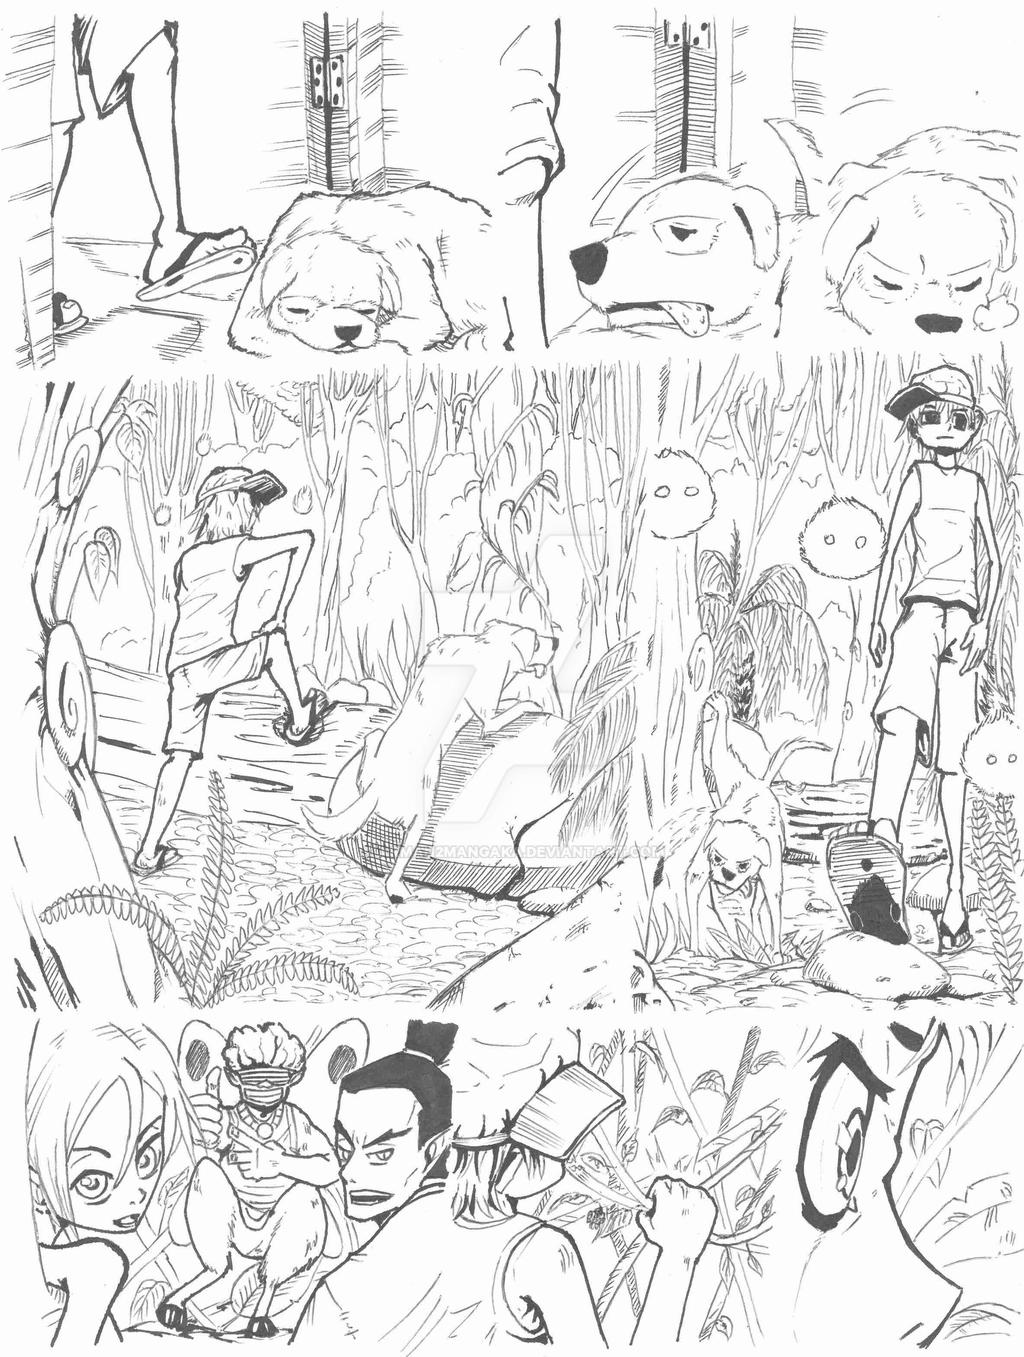 my last comic another page